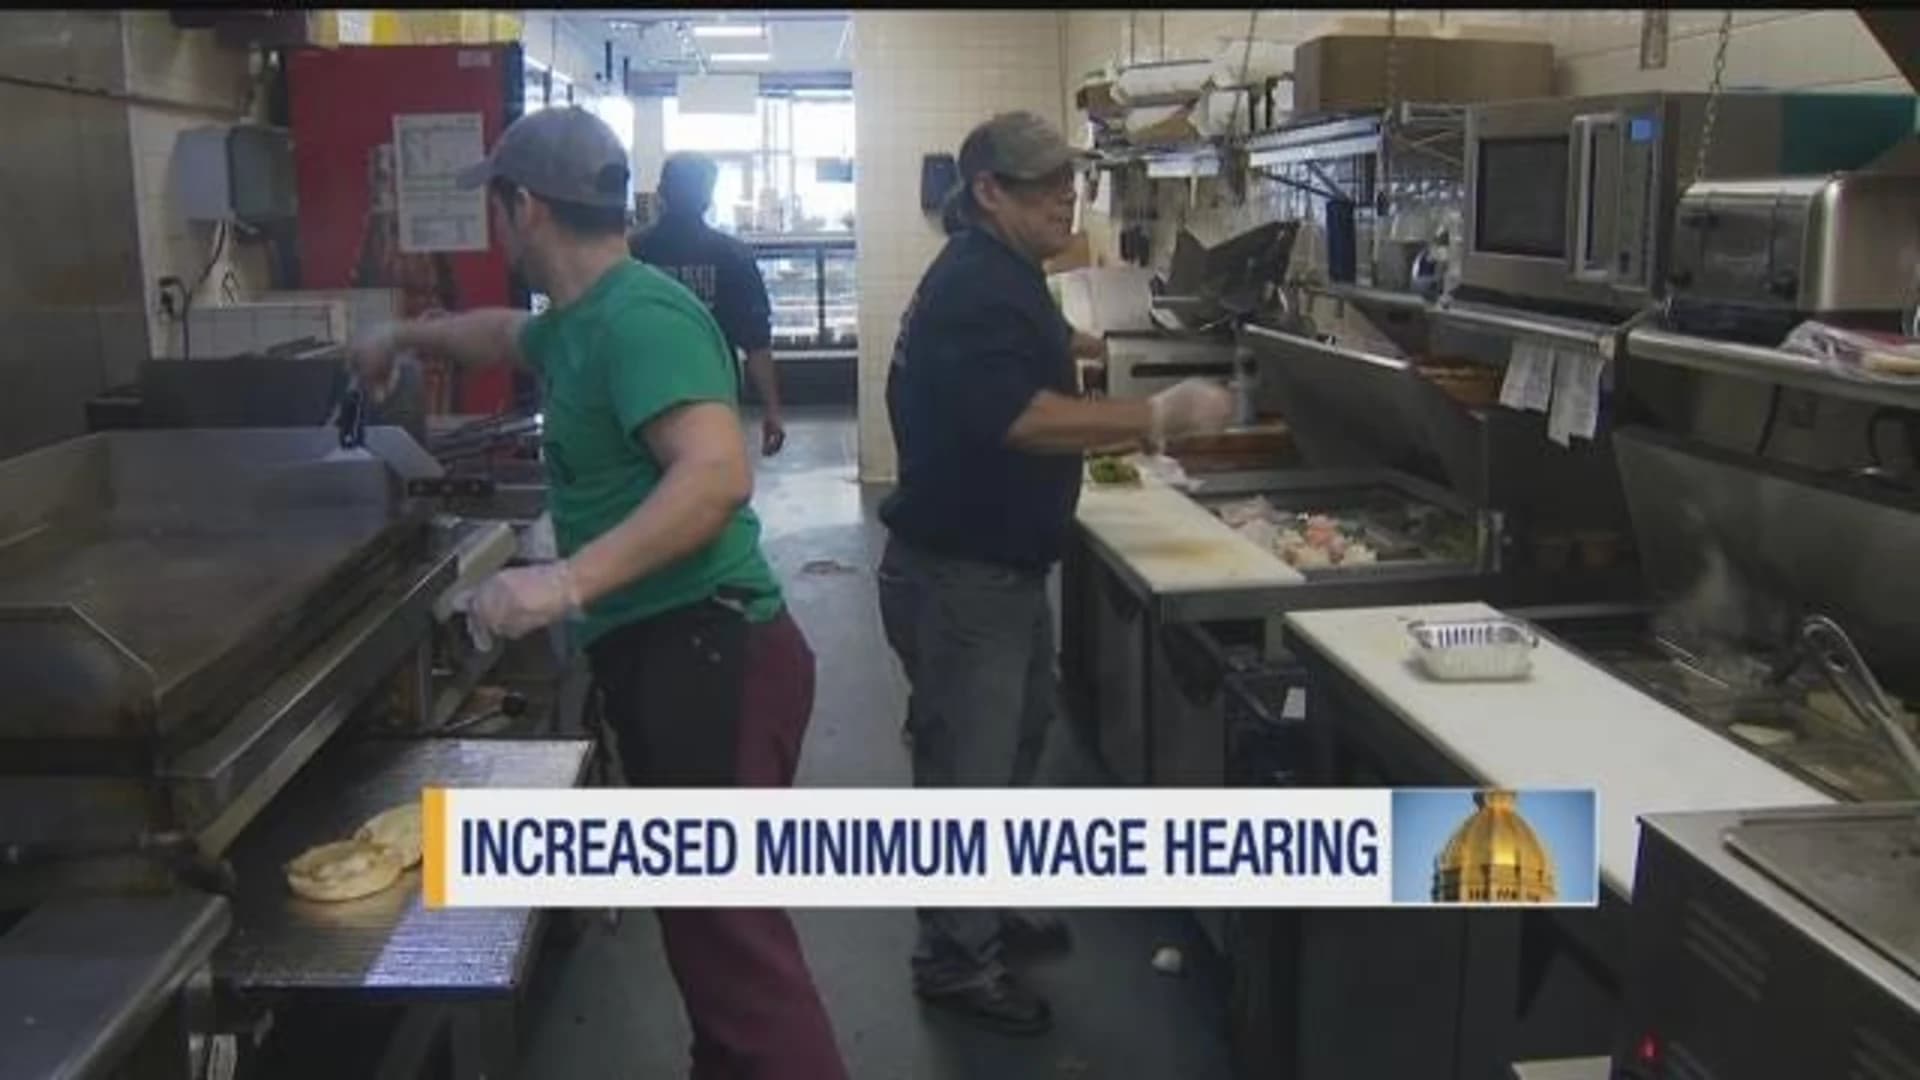 Fight for $15 minimum wage comes to Connecticut